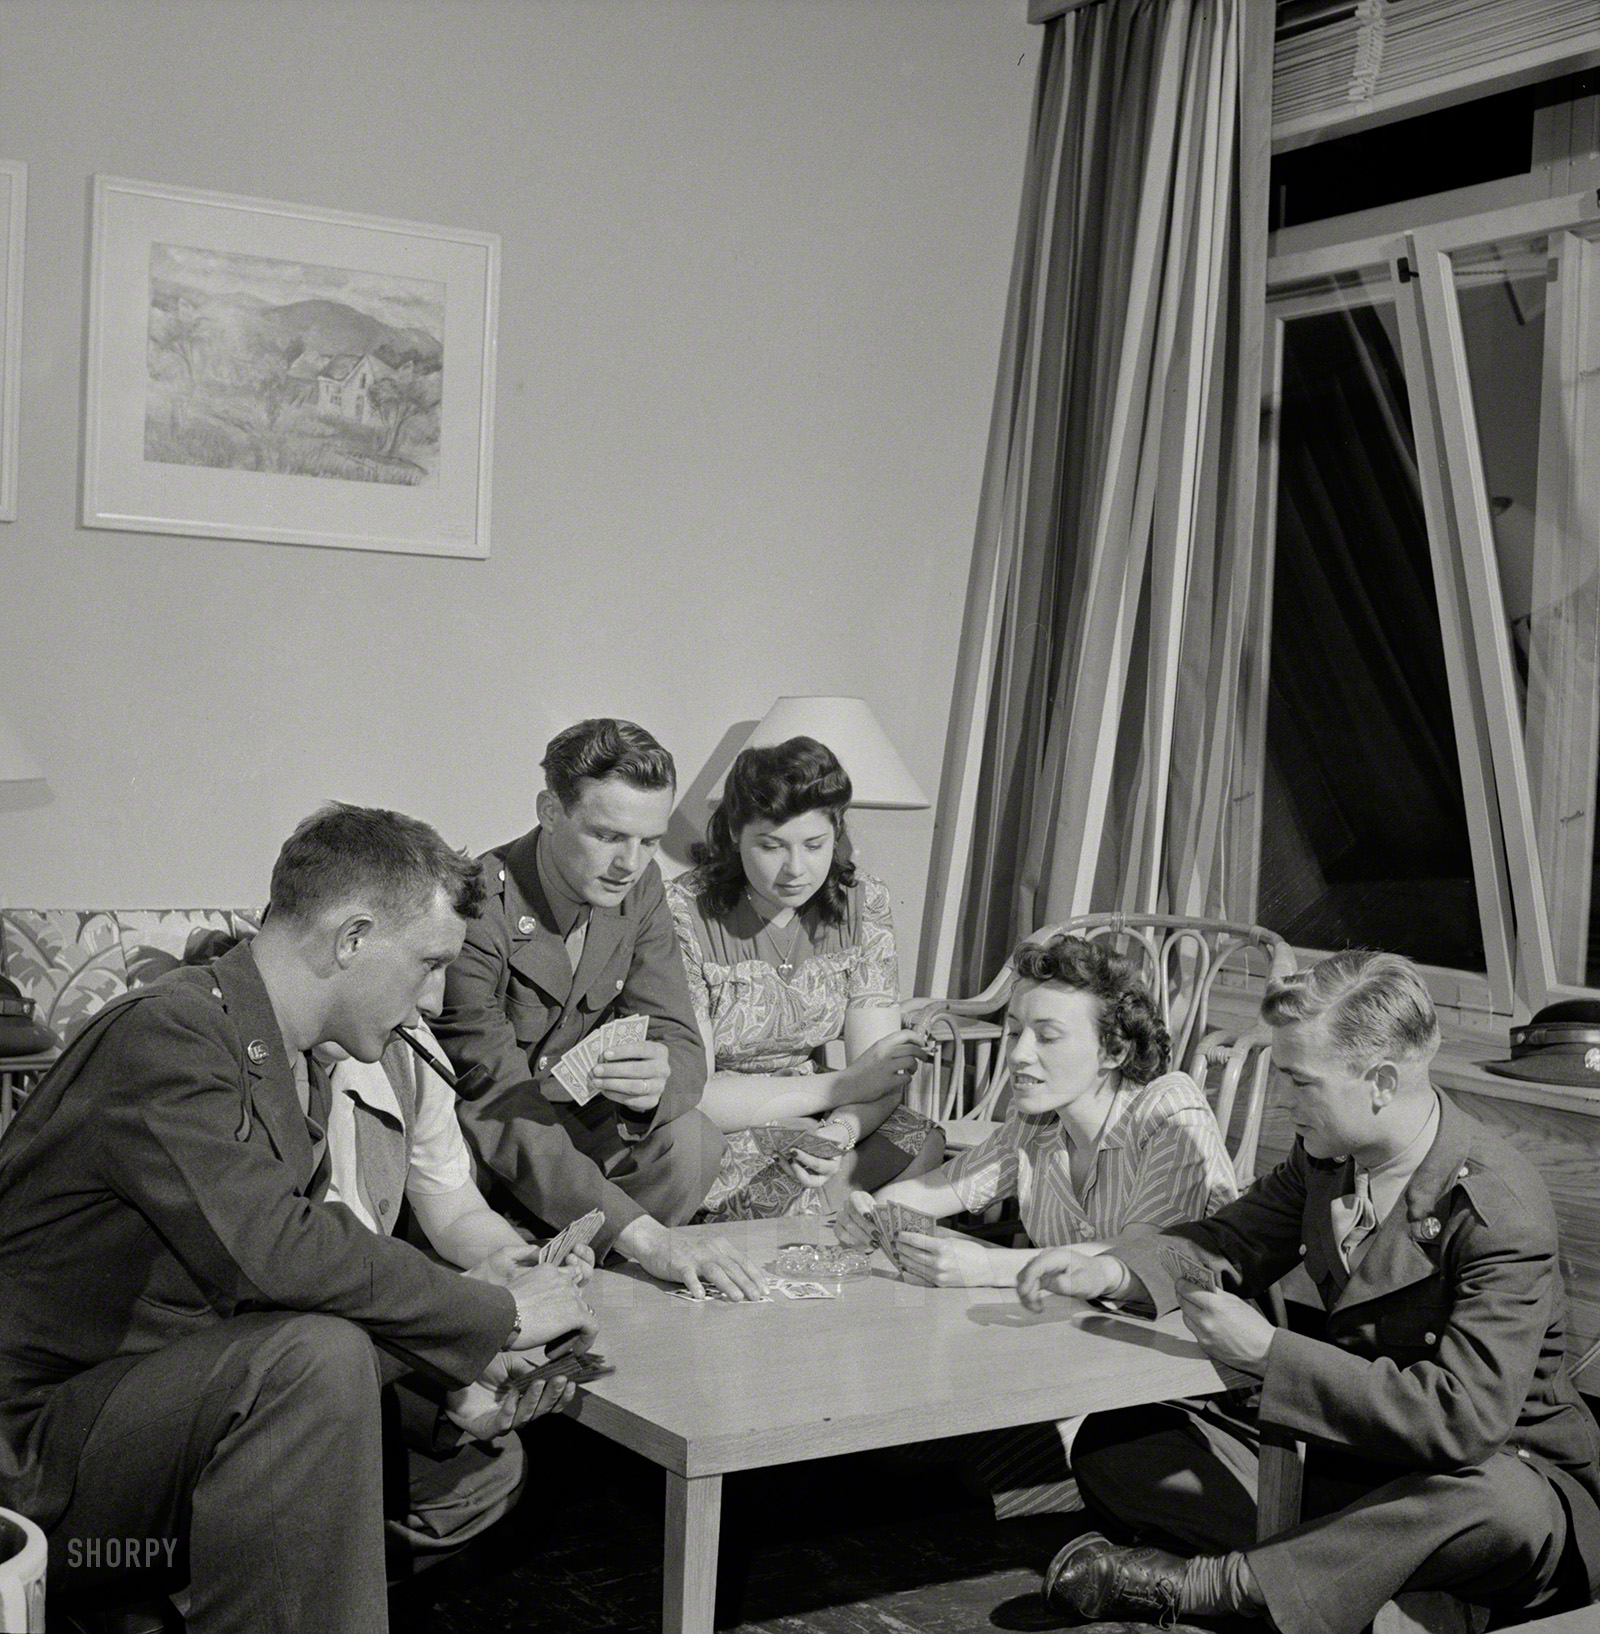 June 1943. Arlington, Virginia. "Girls entertaining their guests in one of the two card rooms at a residence for the women who work in the U.S. government for the duration of the war. More privacy is afforded here than in the main lounge." Photo by Esther Bubley for the Office of War Information. View full size.
